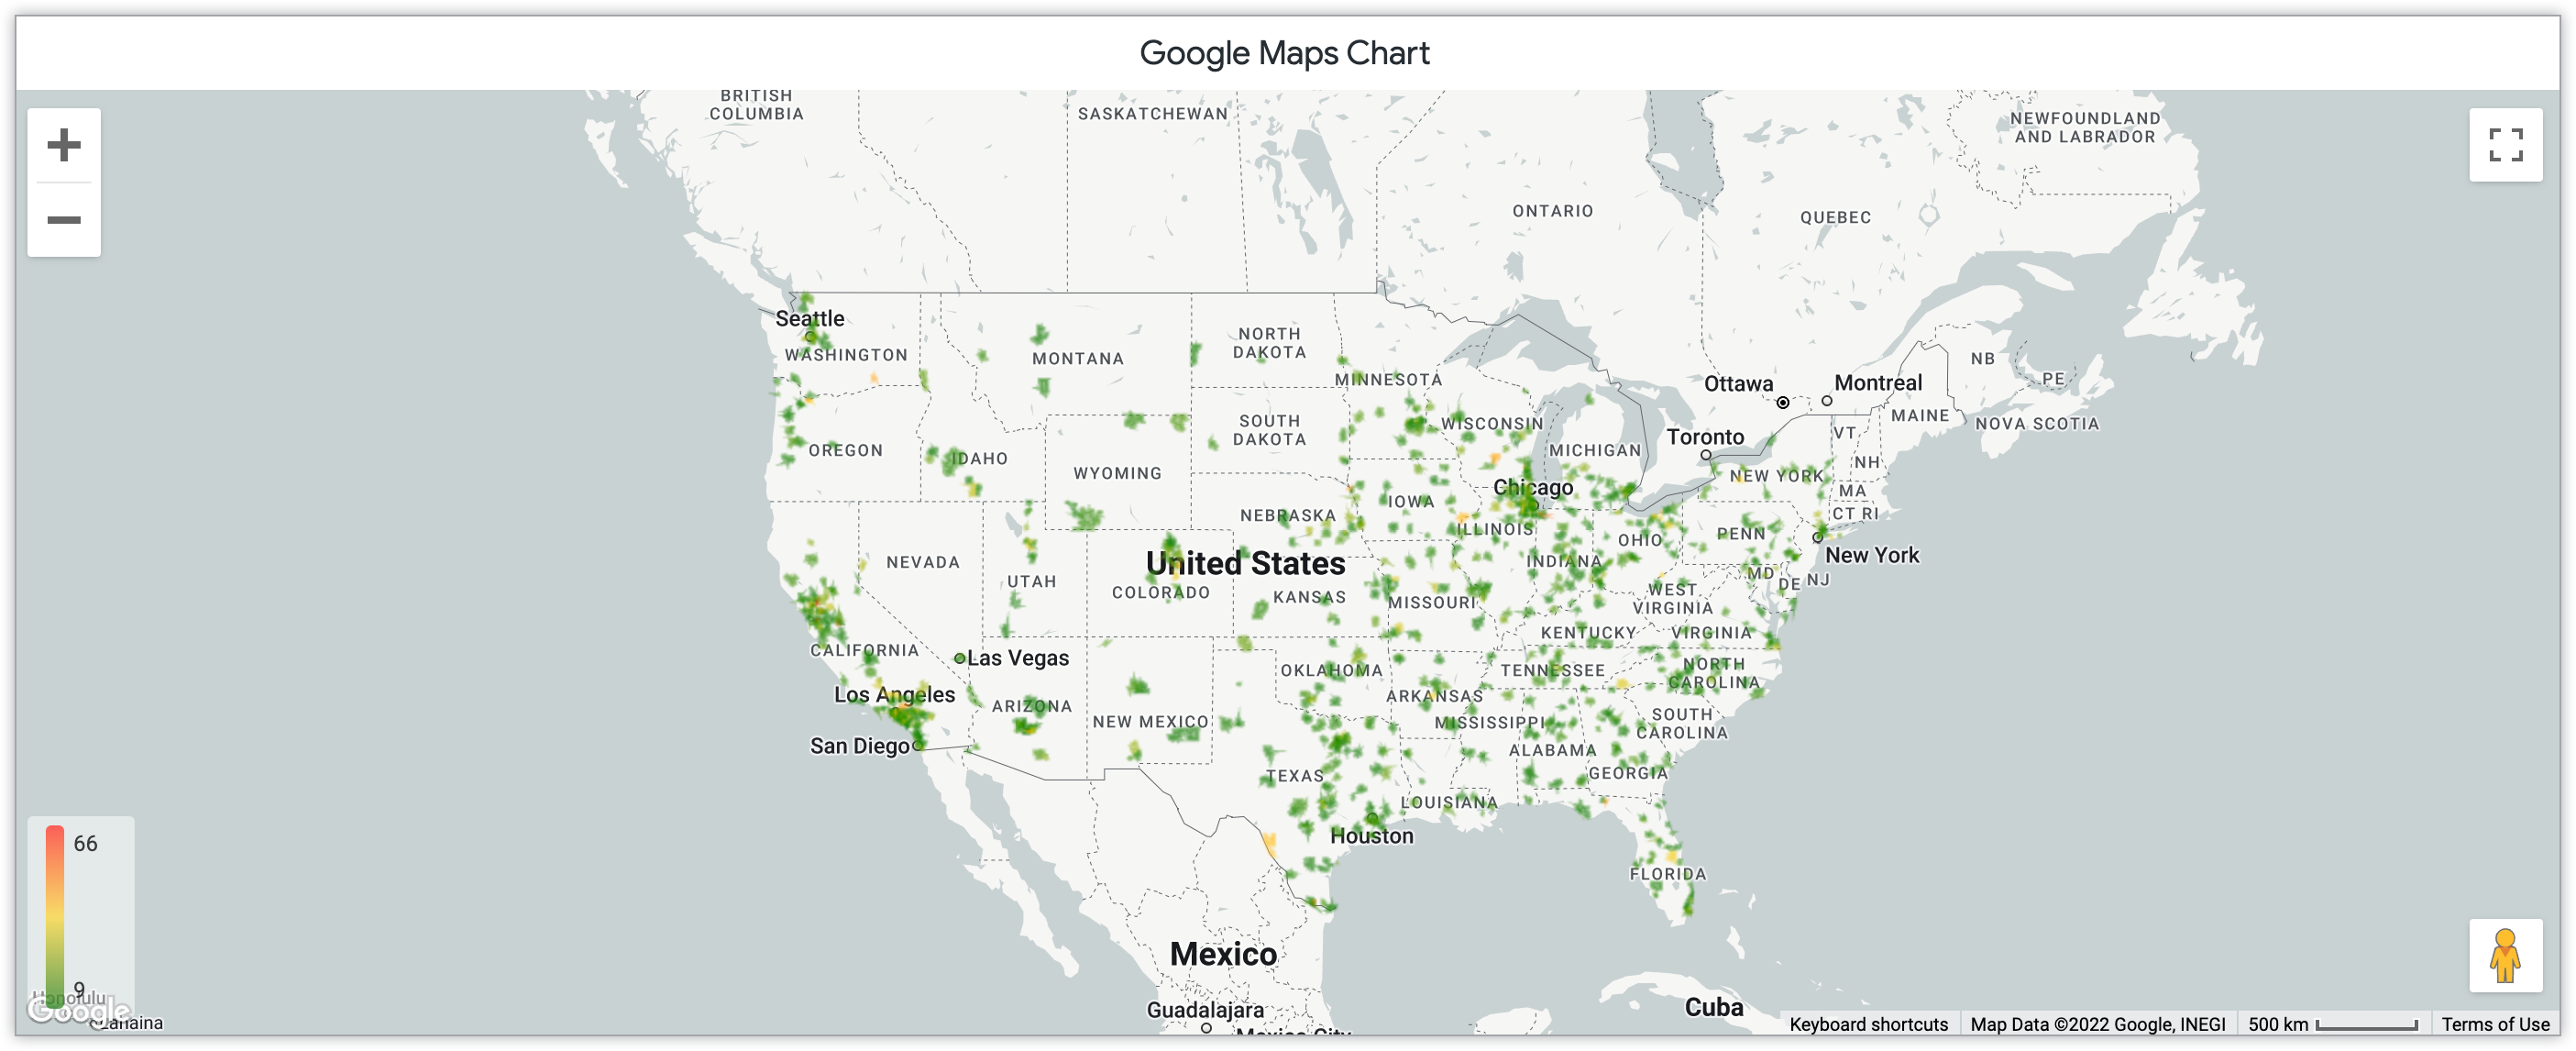 Heatmap Google Maps chart showing the amount of products sold per month in zip codes in the United States.